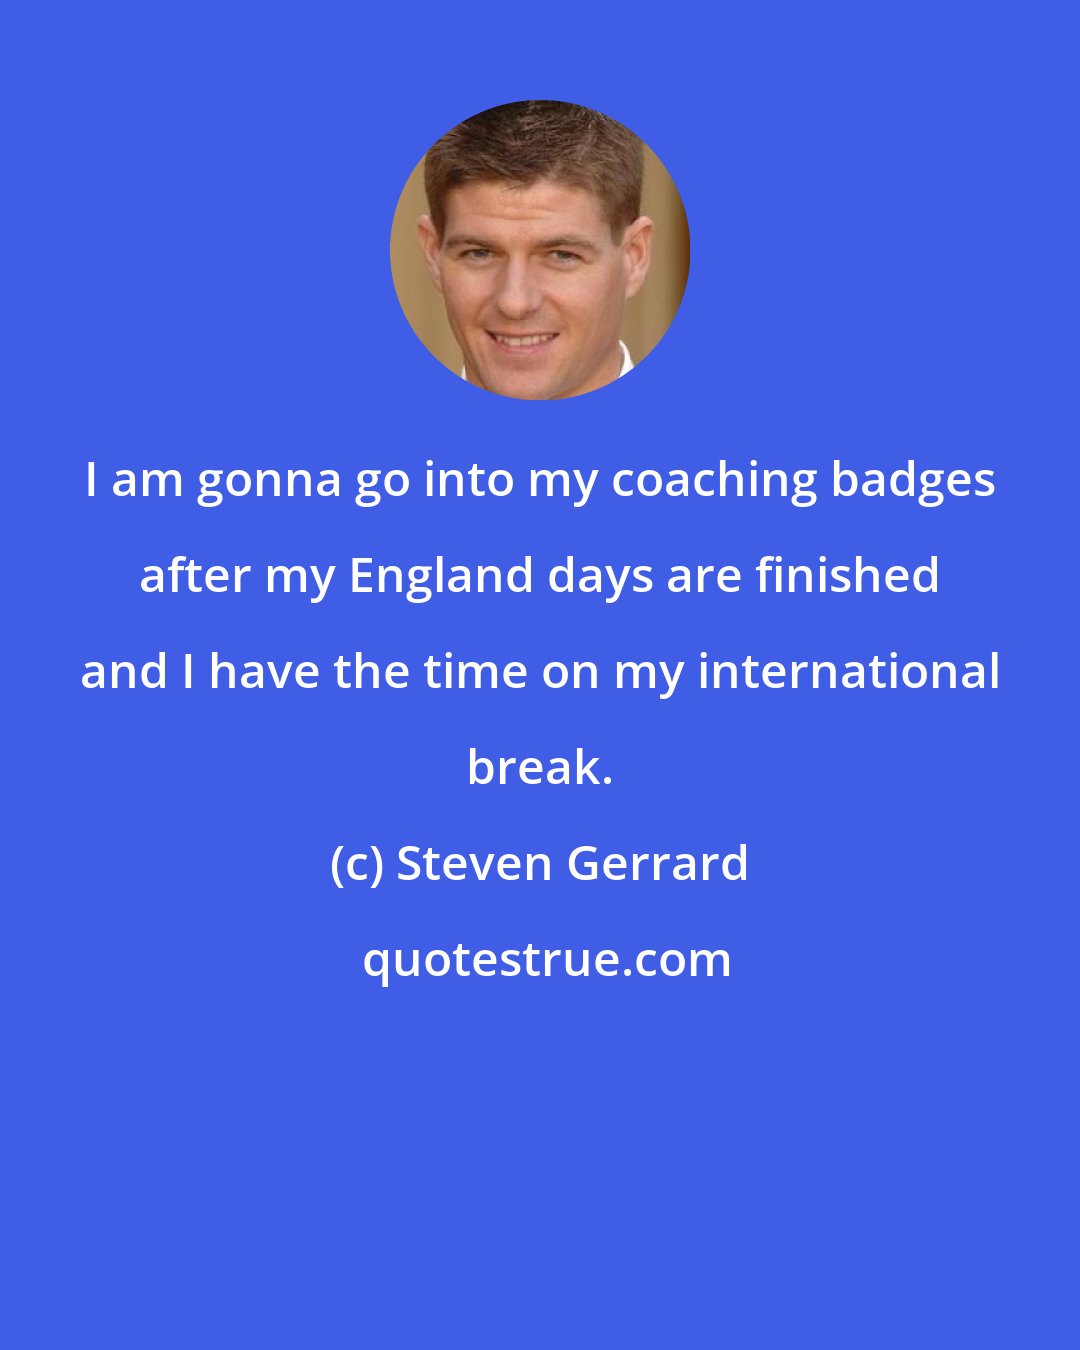 Steven Gerrard: I am gonna go into my coaching badges after my England days are finished and I have the time on my international break.